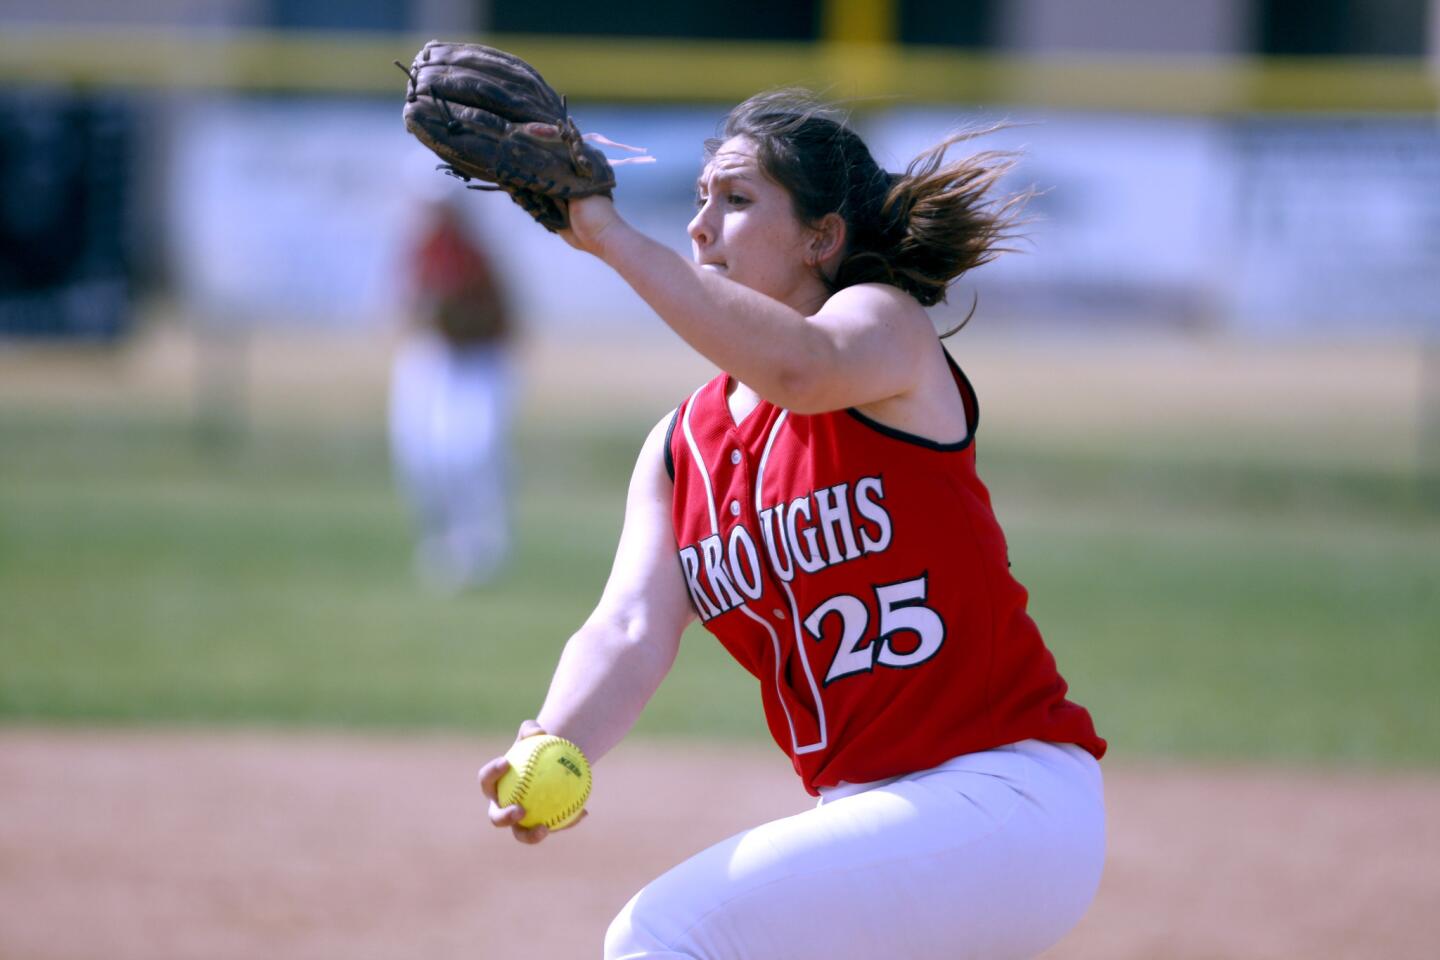 Burroughs High School softball pitcher #25 Presley Miraglia throws in game vs. Crescenta Valley High School at the Falcons home field in La Crescenta on Thursday, April 27, 2017.